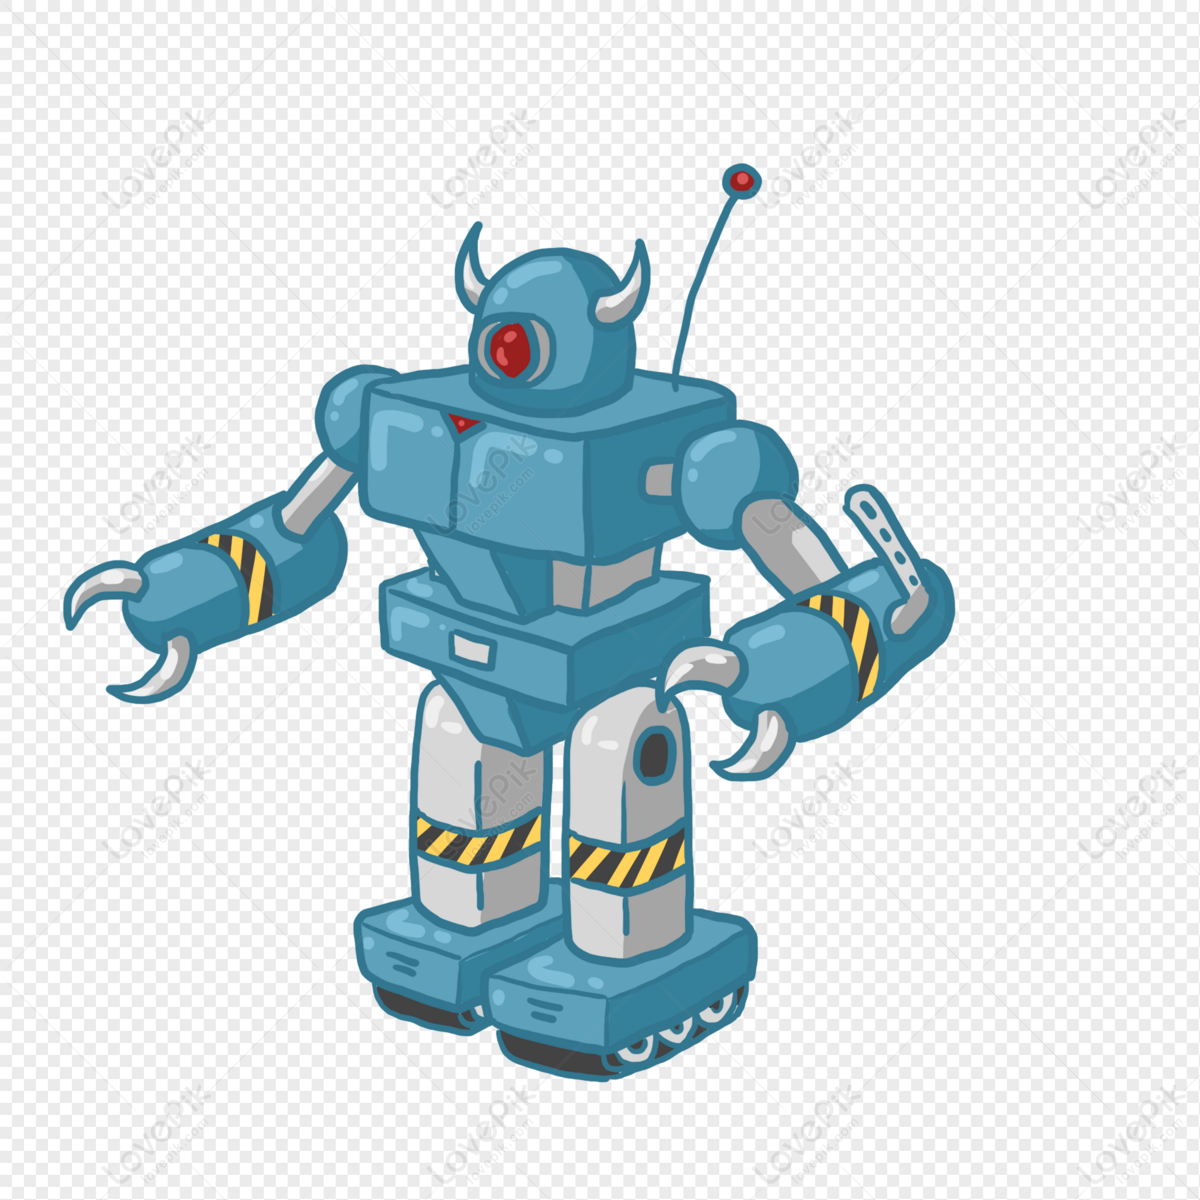 Toy Robot PNG Transparent And Clipart Image For Free Download - Lovepik |  401237306